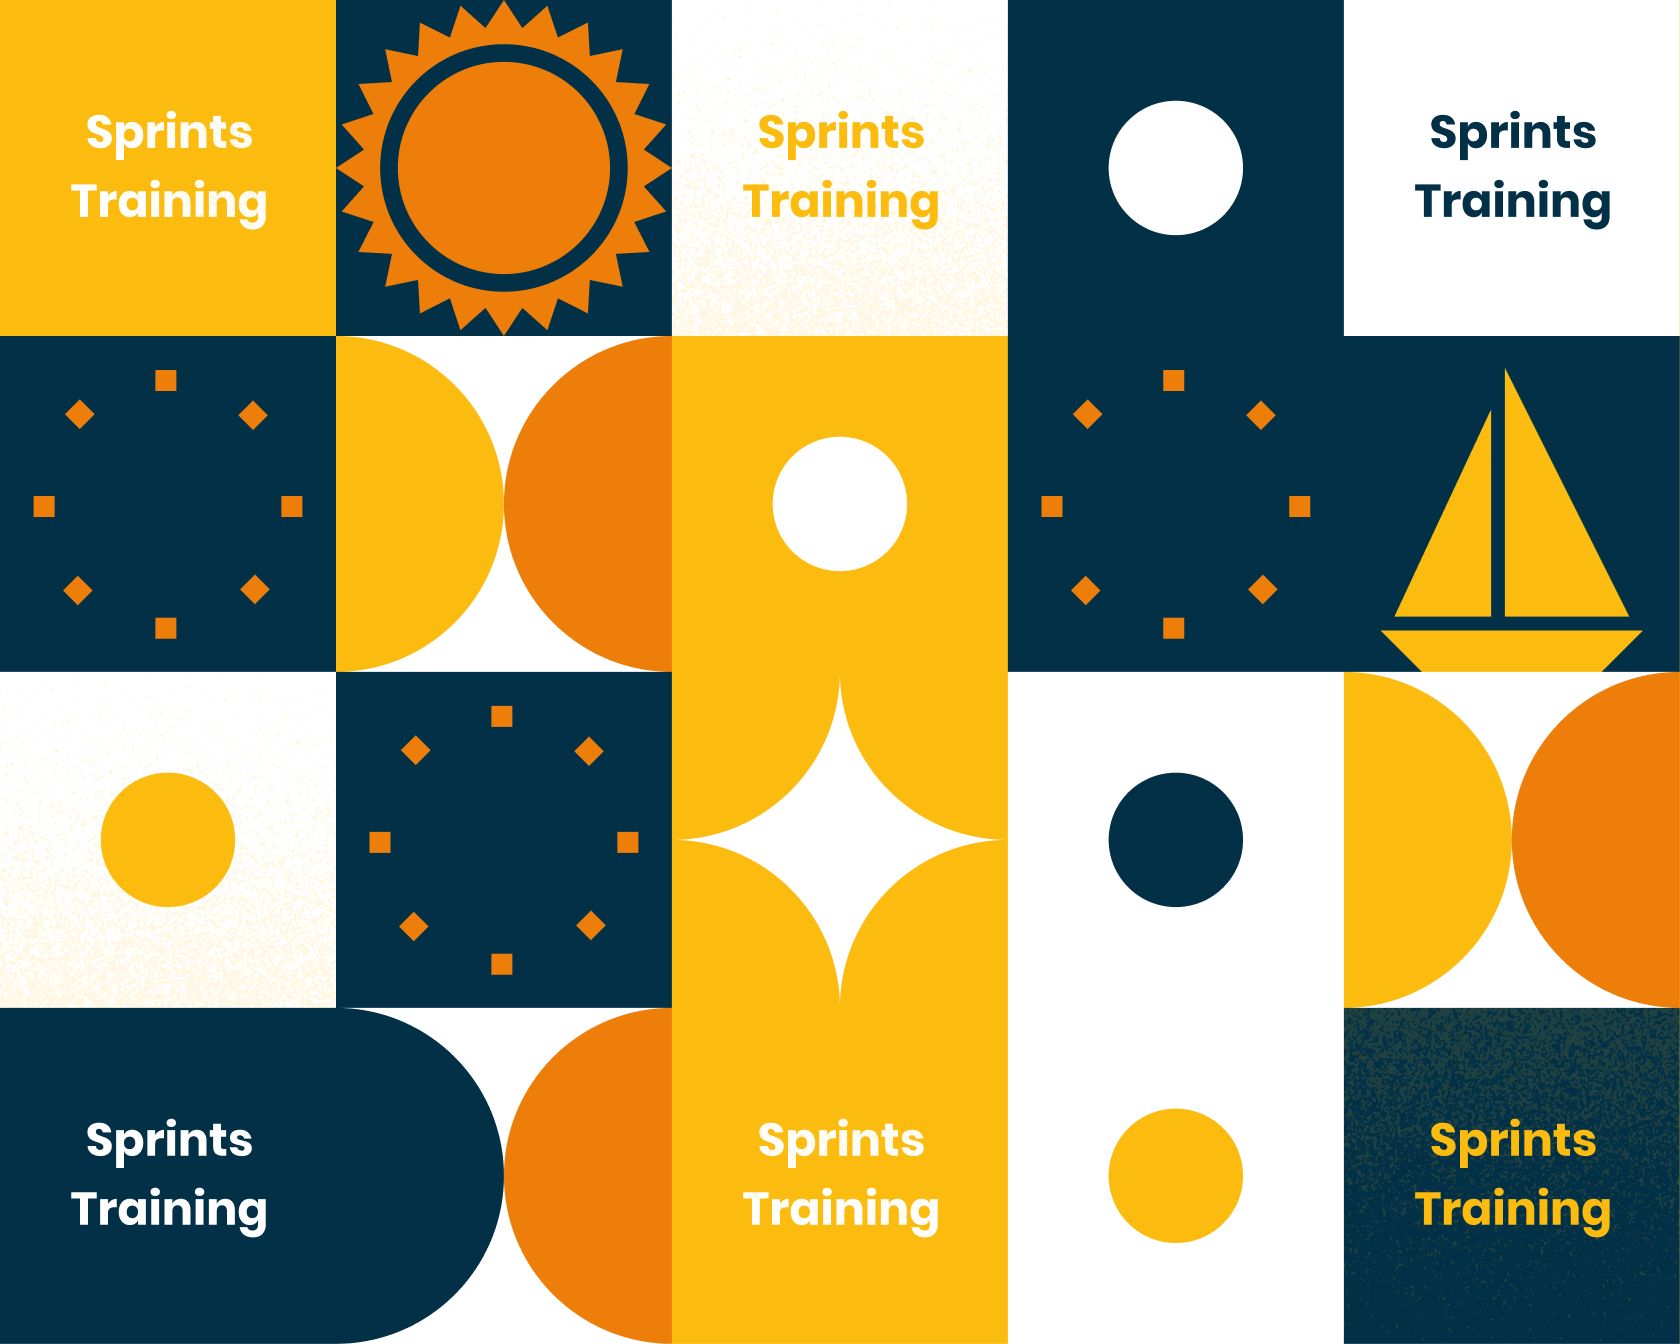 Learn how to run successful design sprints